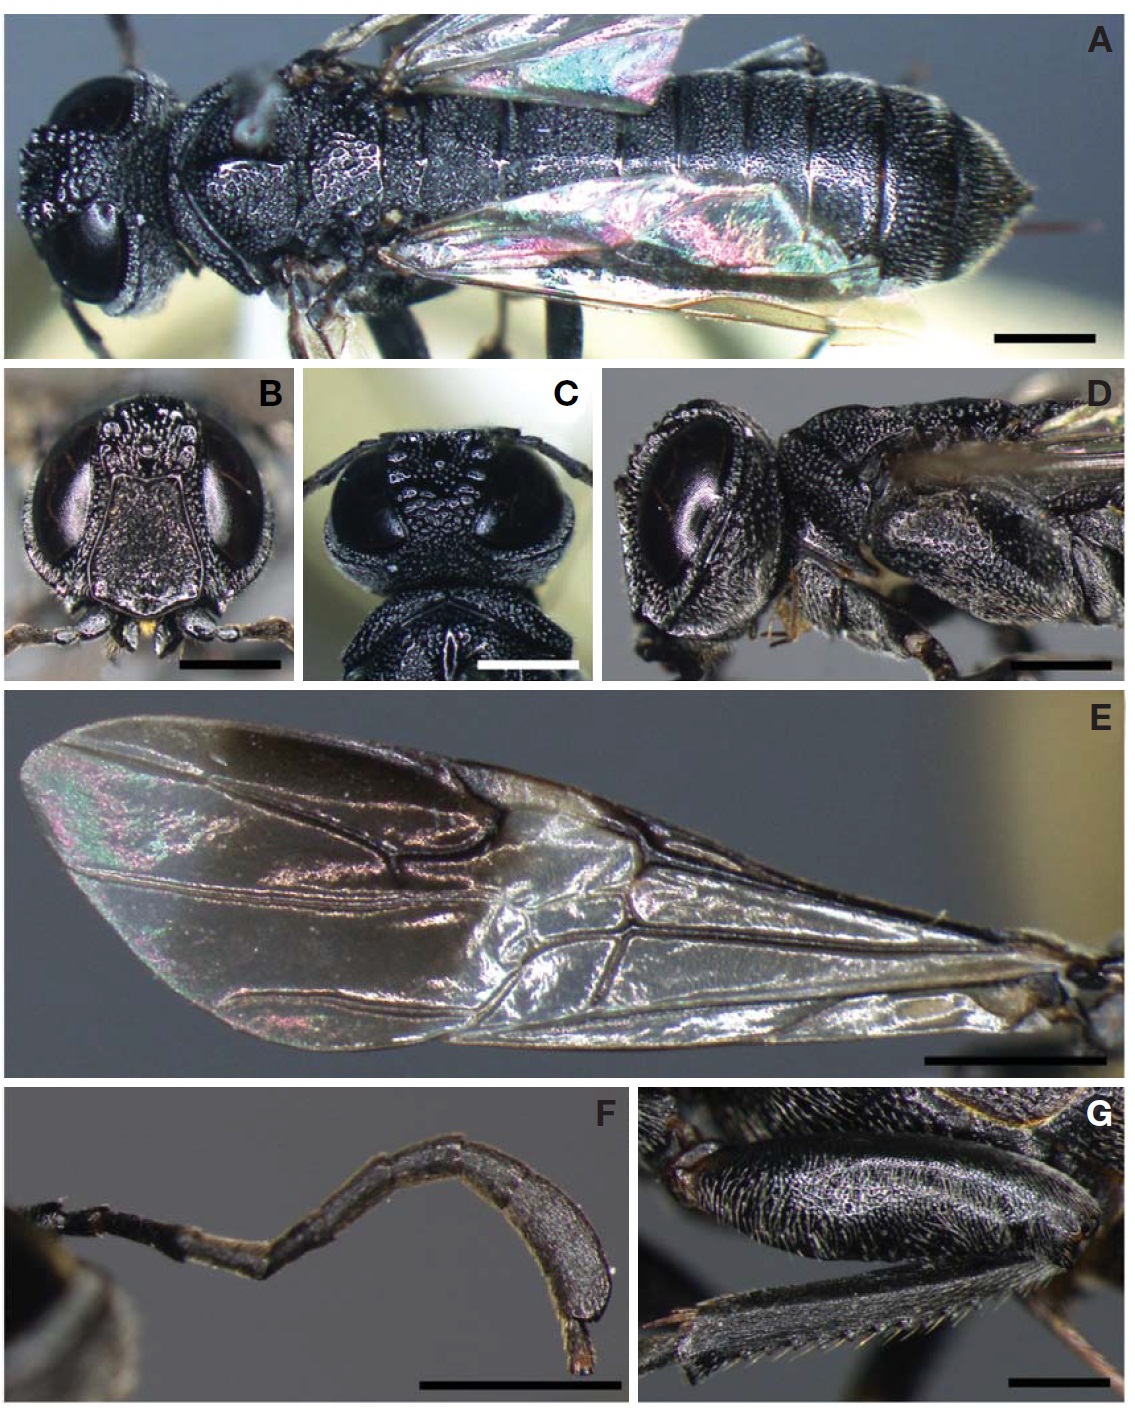 Female of Stirocorsia tosensis: A Habitus in dorsal view; B Head in frontal view; C Head in Dorsal view; D Head andthorax in lateral view; E Forewing; F Antennae; G Hind femur and tibia. Scale bars: A-G=1 mm.